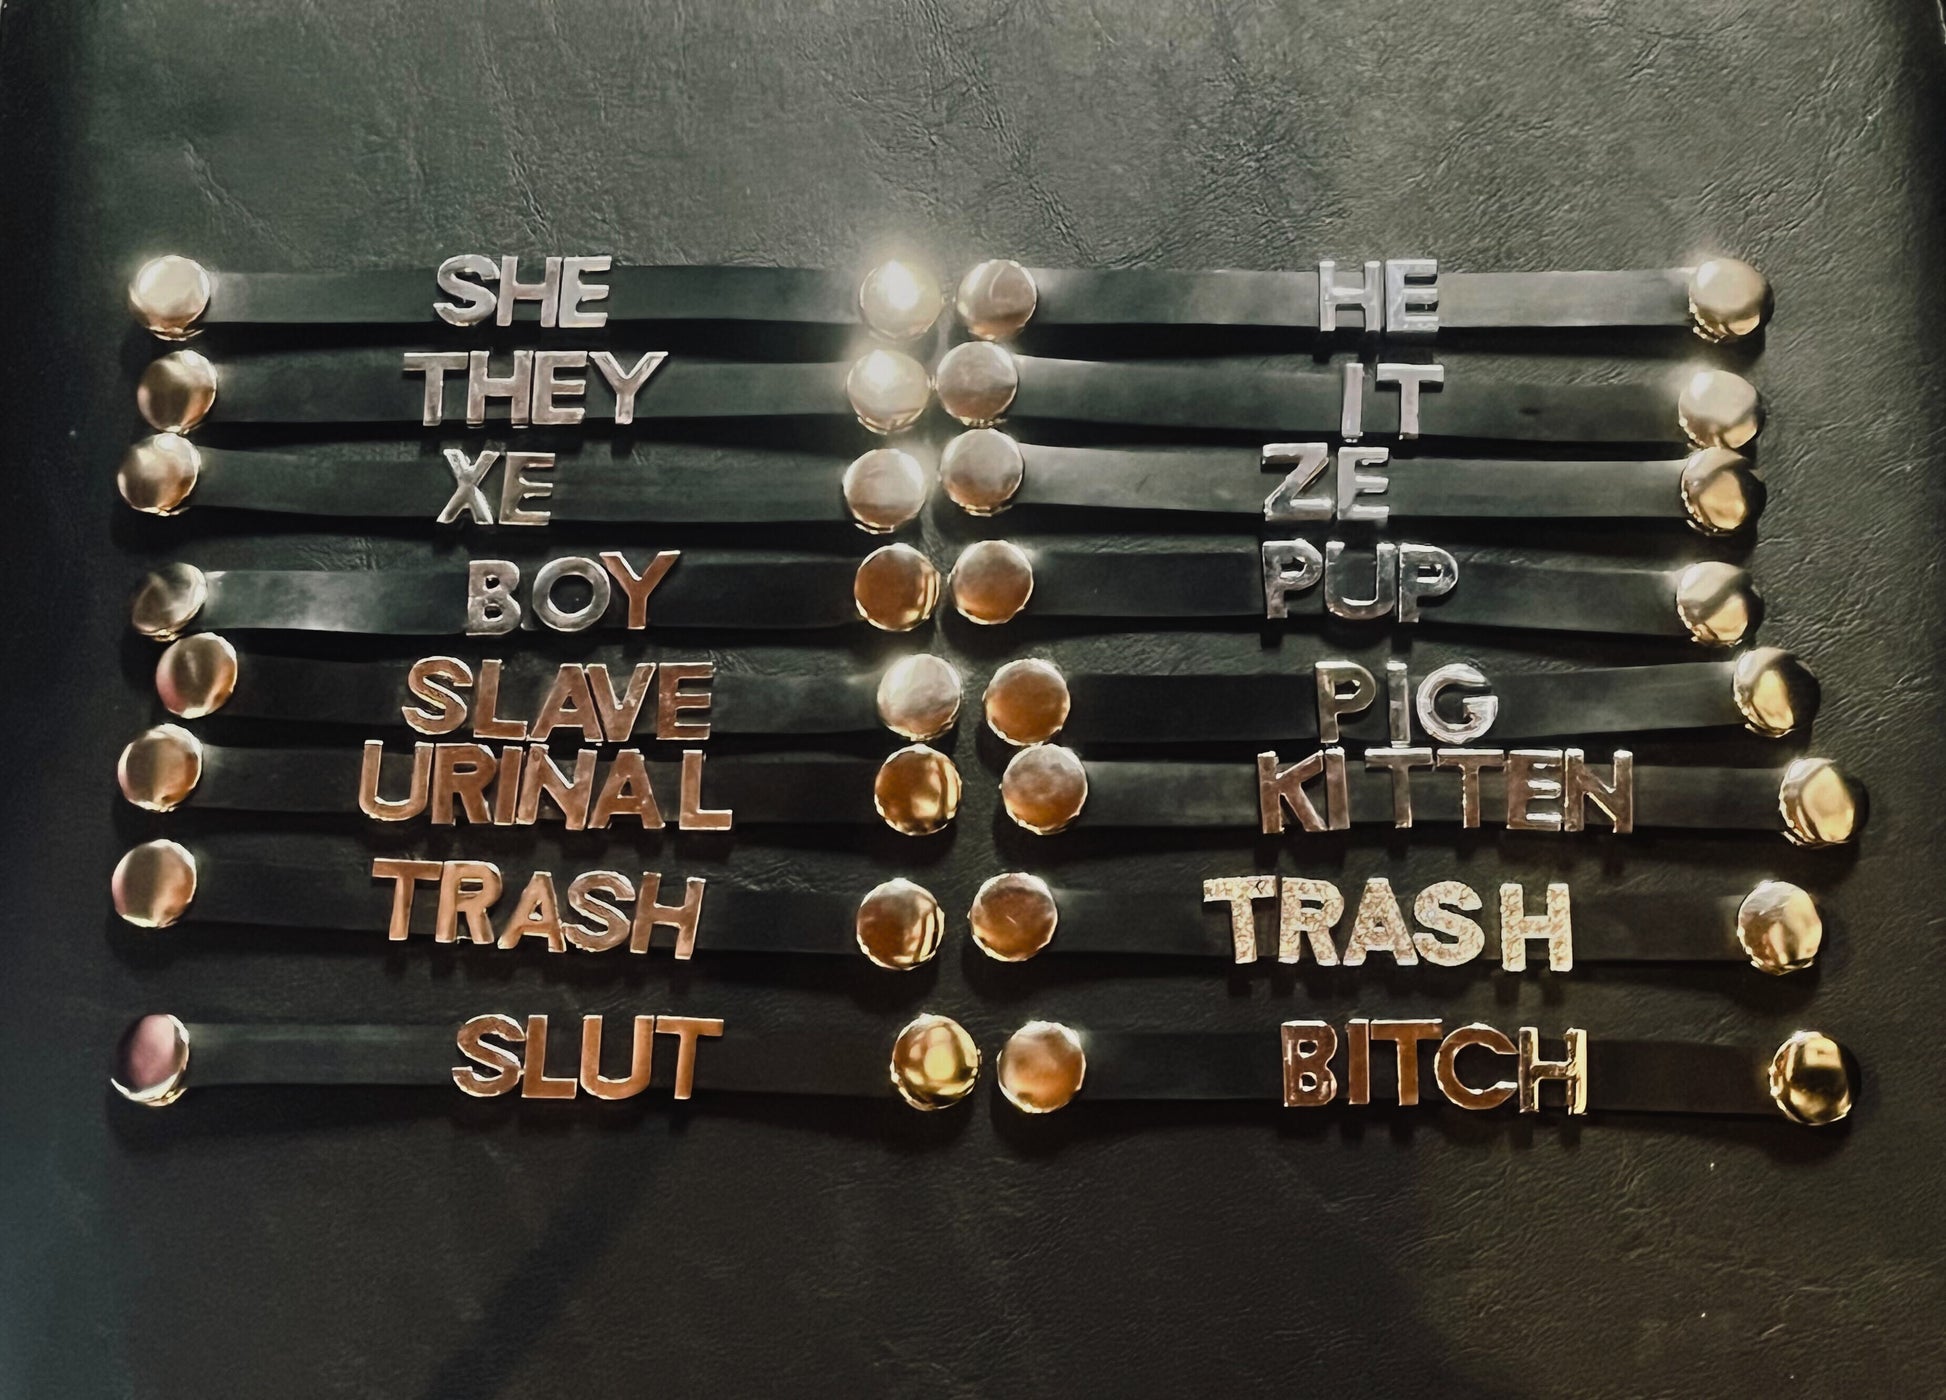 Several Heavy Rubber Word Name Tags arranged together.